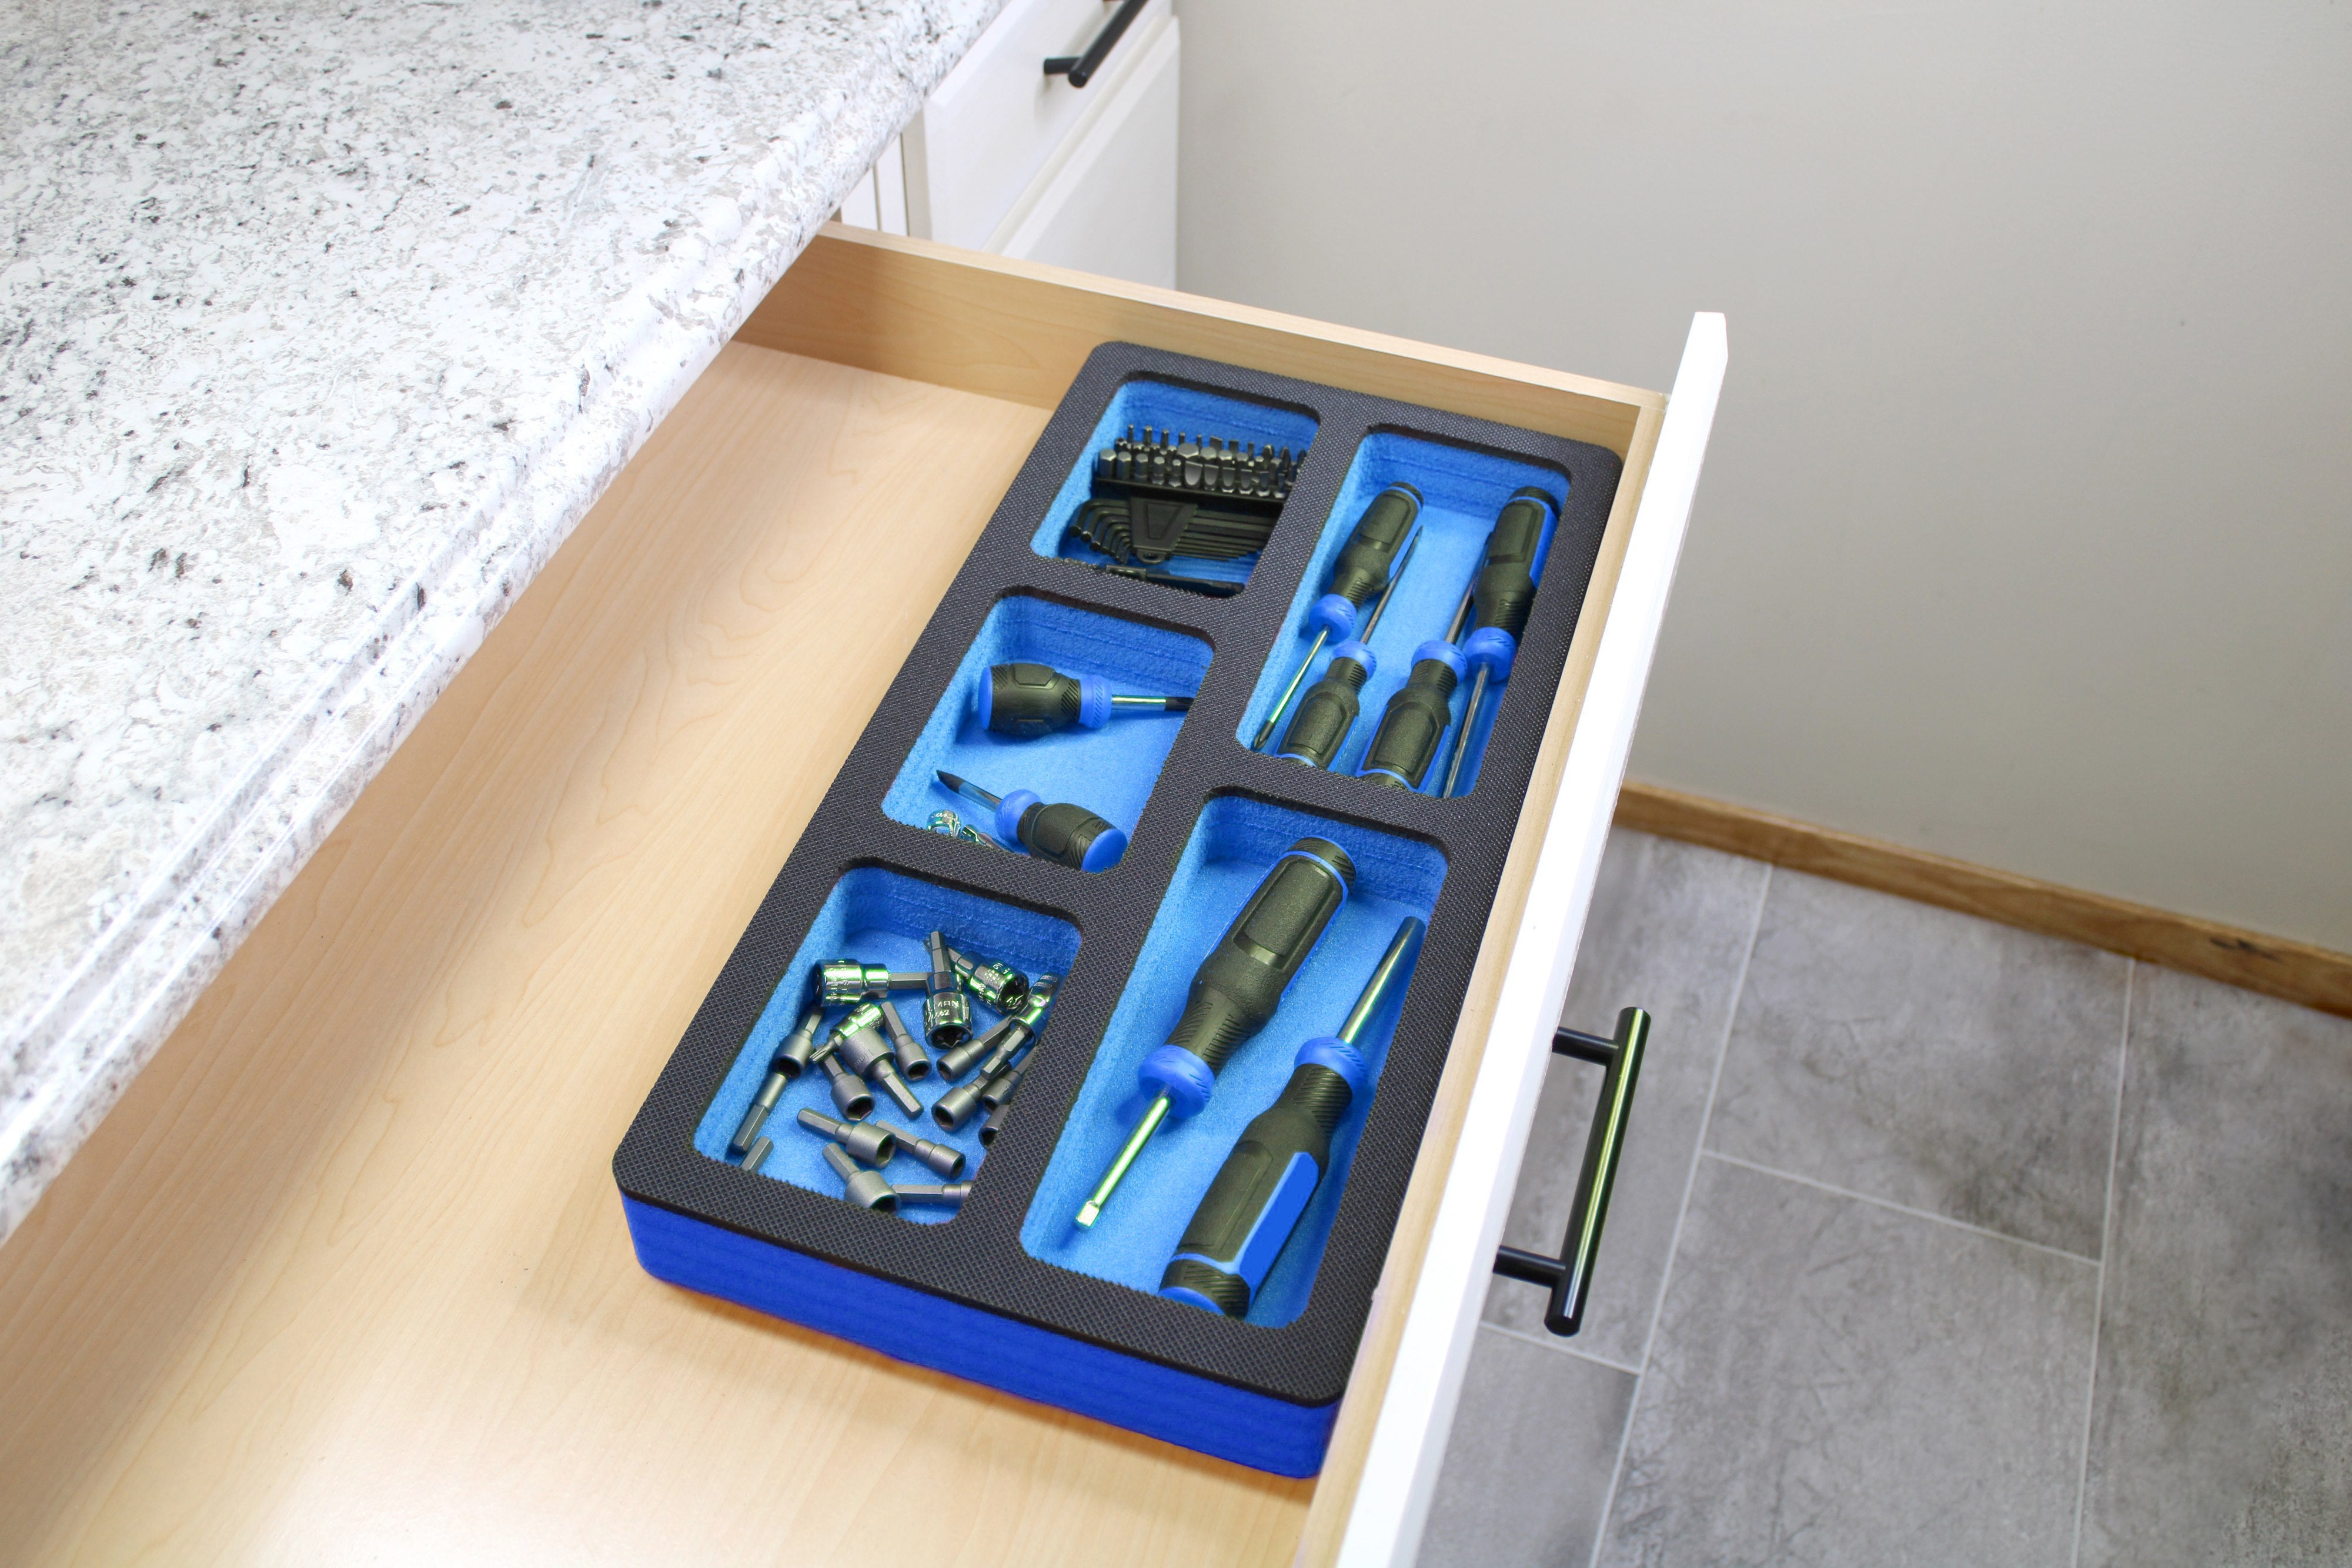 Tool Drawer Organizer Insert Blue and Black Durable Foam Strong Non-Slip Anti-Rattle Bin Holder Tray 20 x 10 Inches 5 Pockets Fits Craftsman Husky Kobalt Milwaukee and Many Others